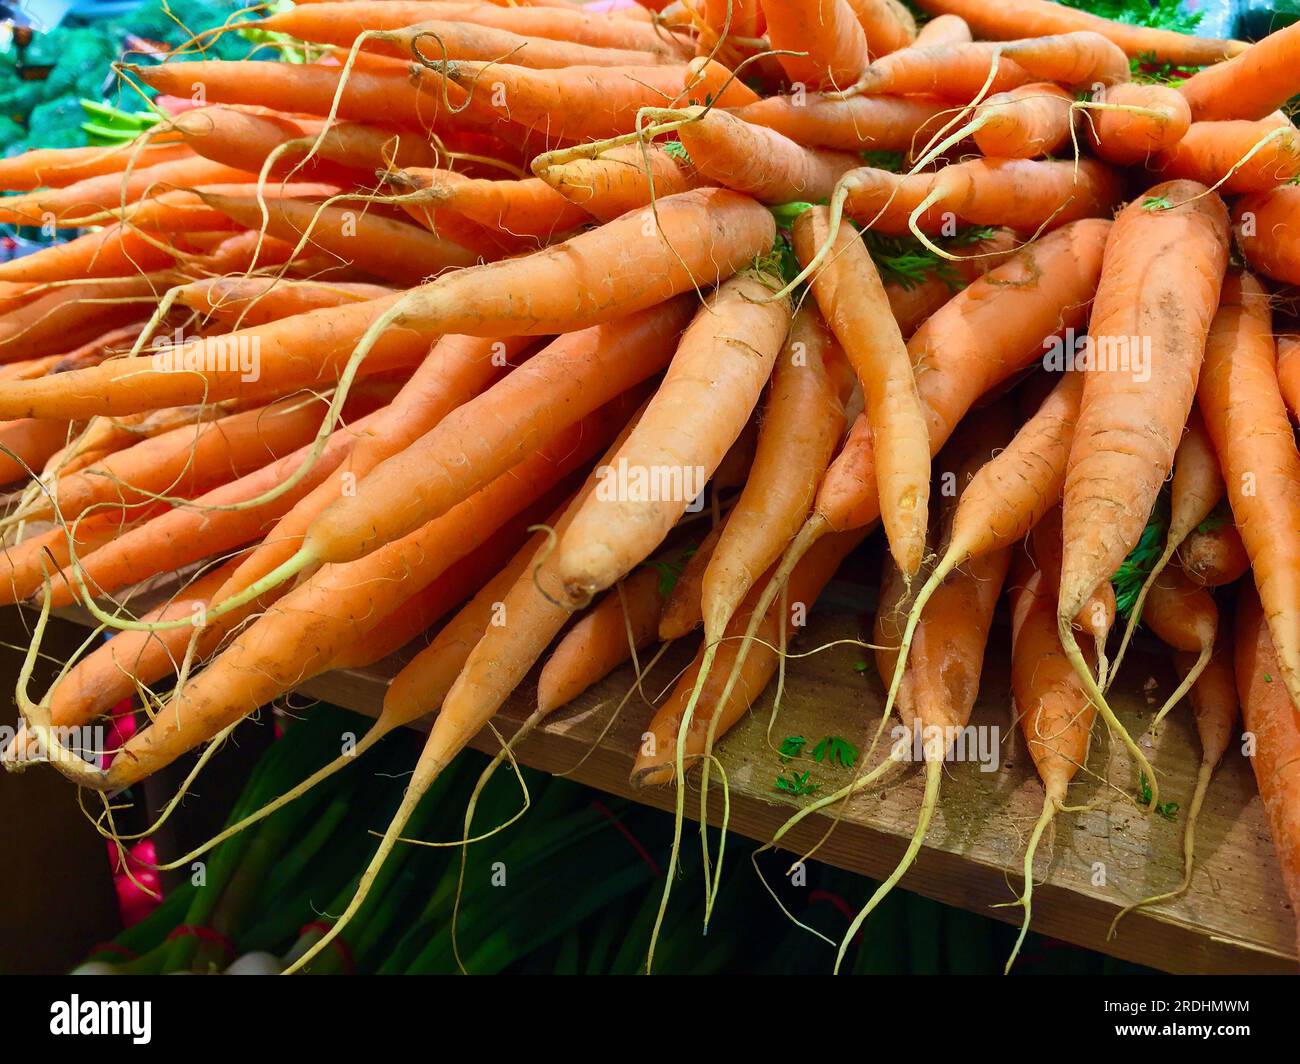 Heap of fresh harvested orange colored carrots ready for sale at farmers market. Stock Photo